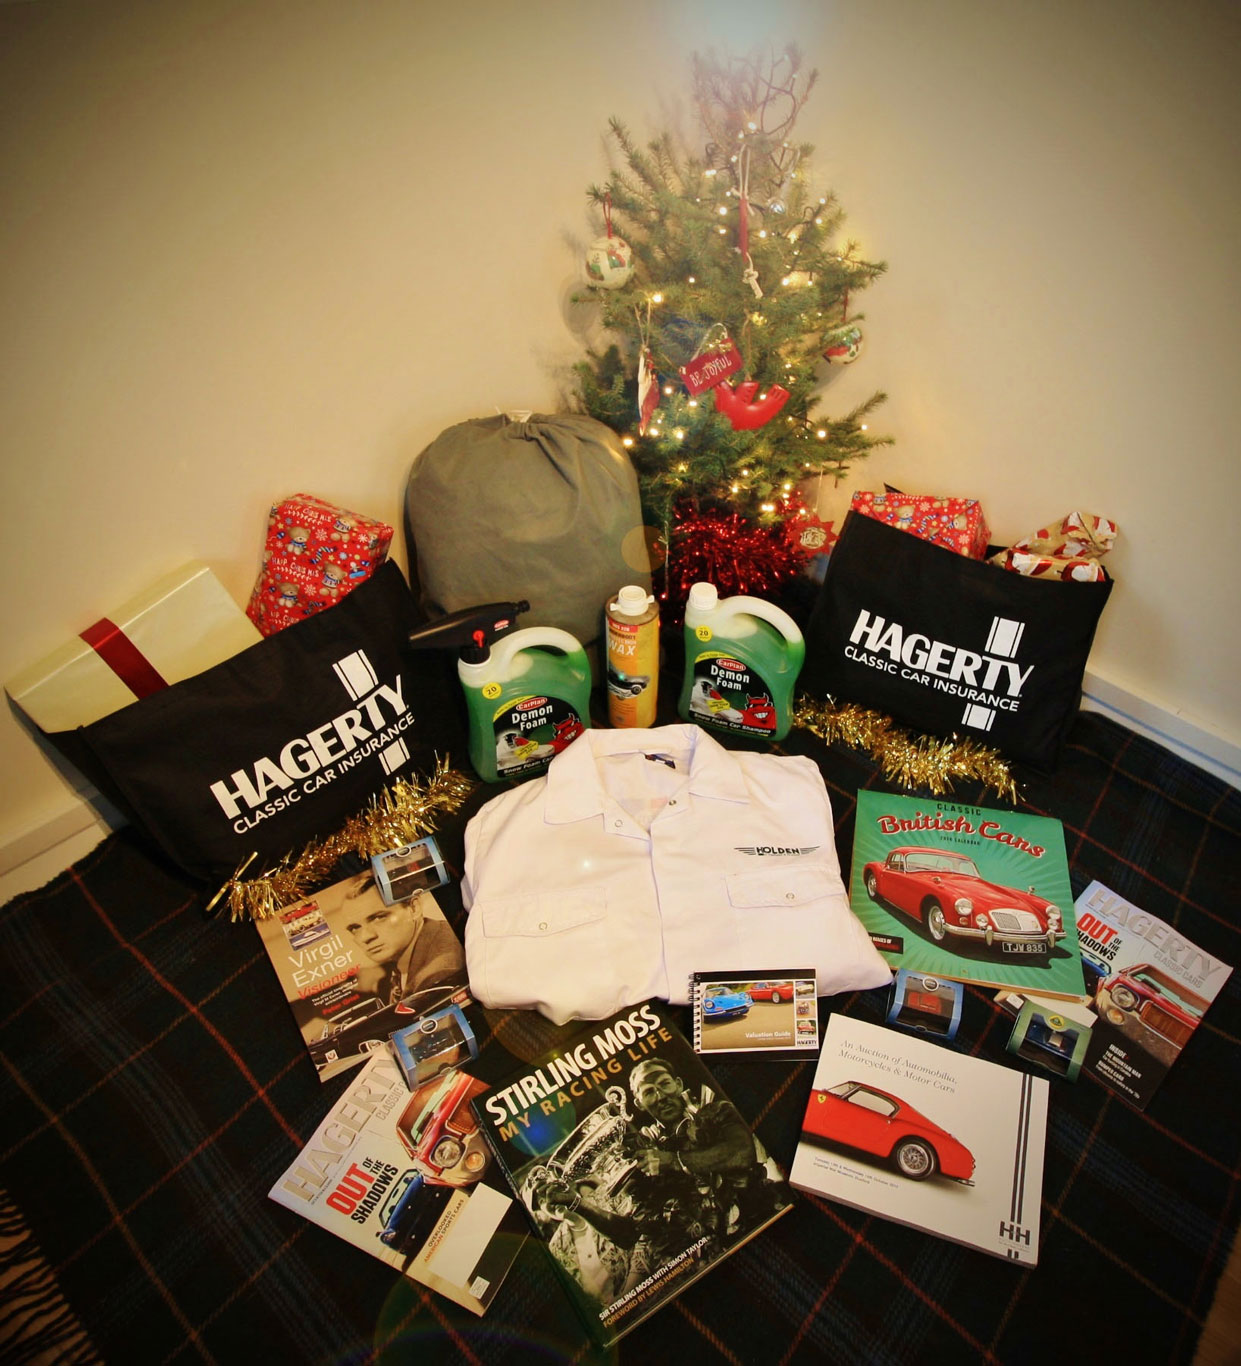 Win a Festive Feast of Classic Presents from Hagerty!